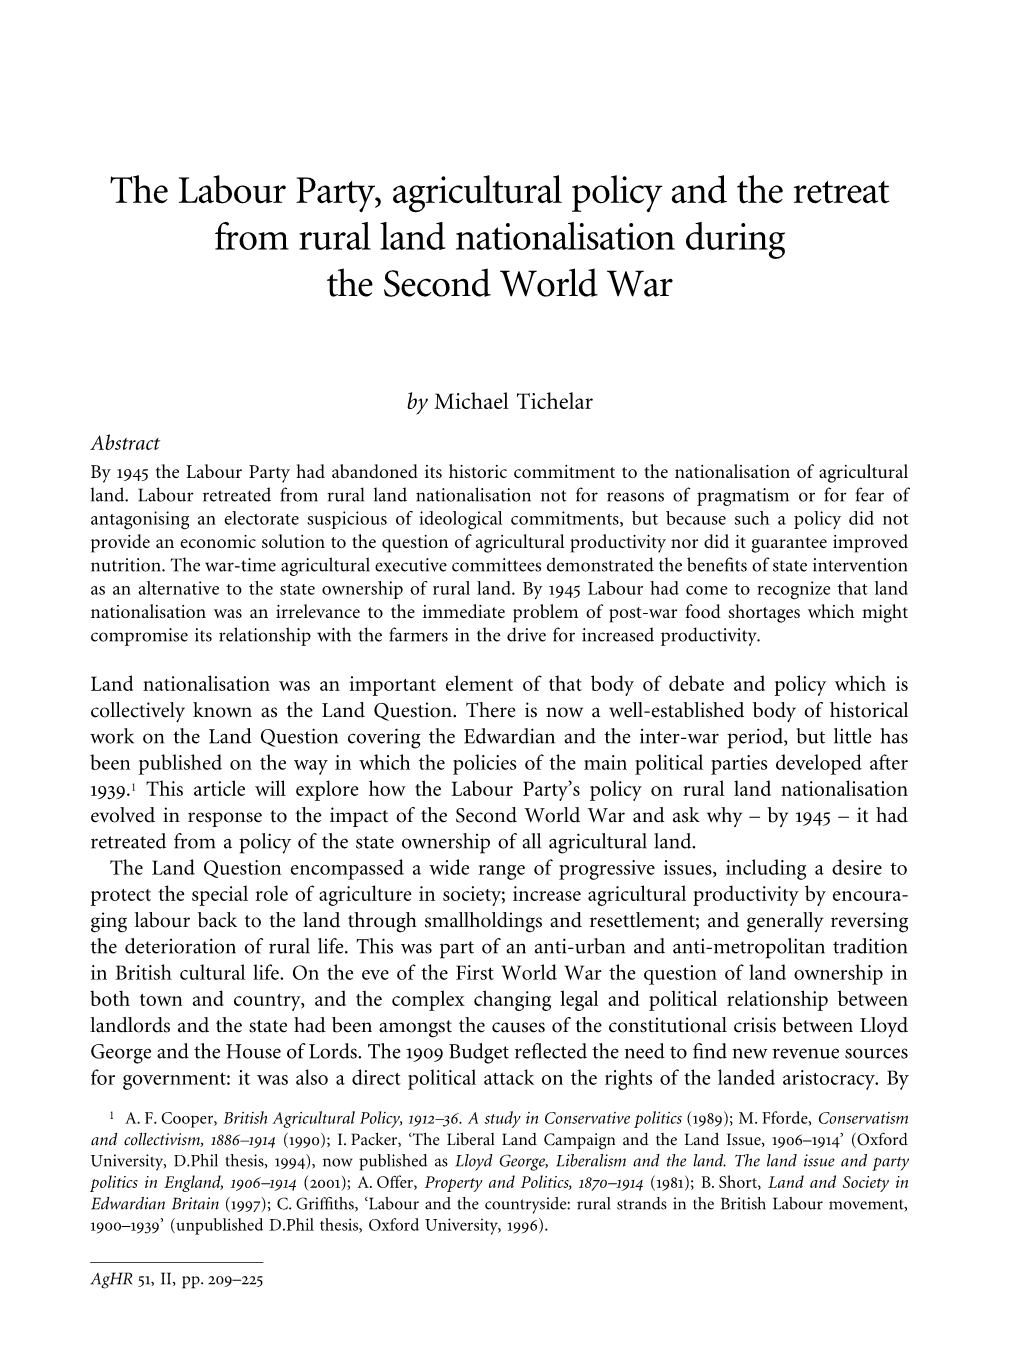 The Labour Party, Agricultural Policy and the Retreat from Rural Land Nationalisation During the Second World War